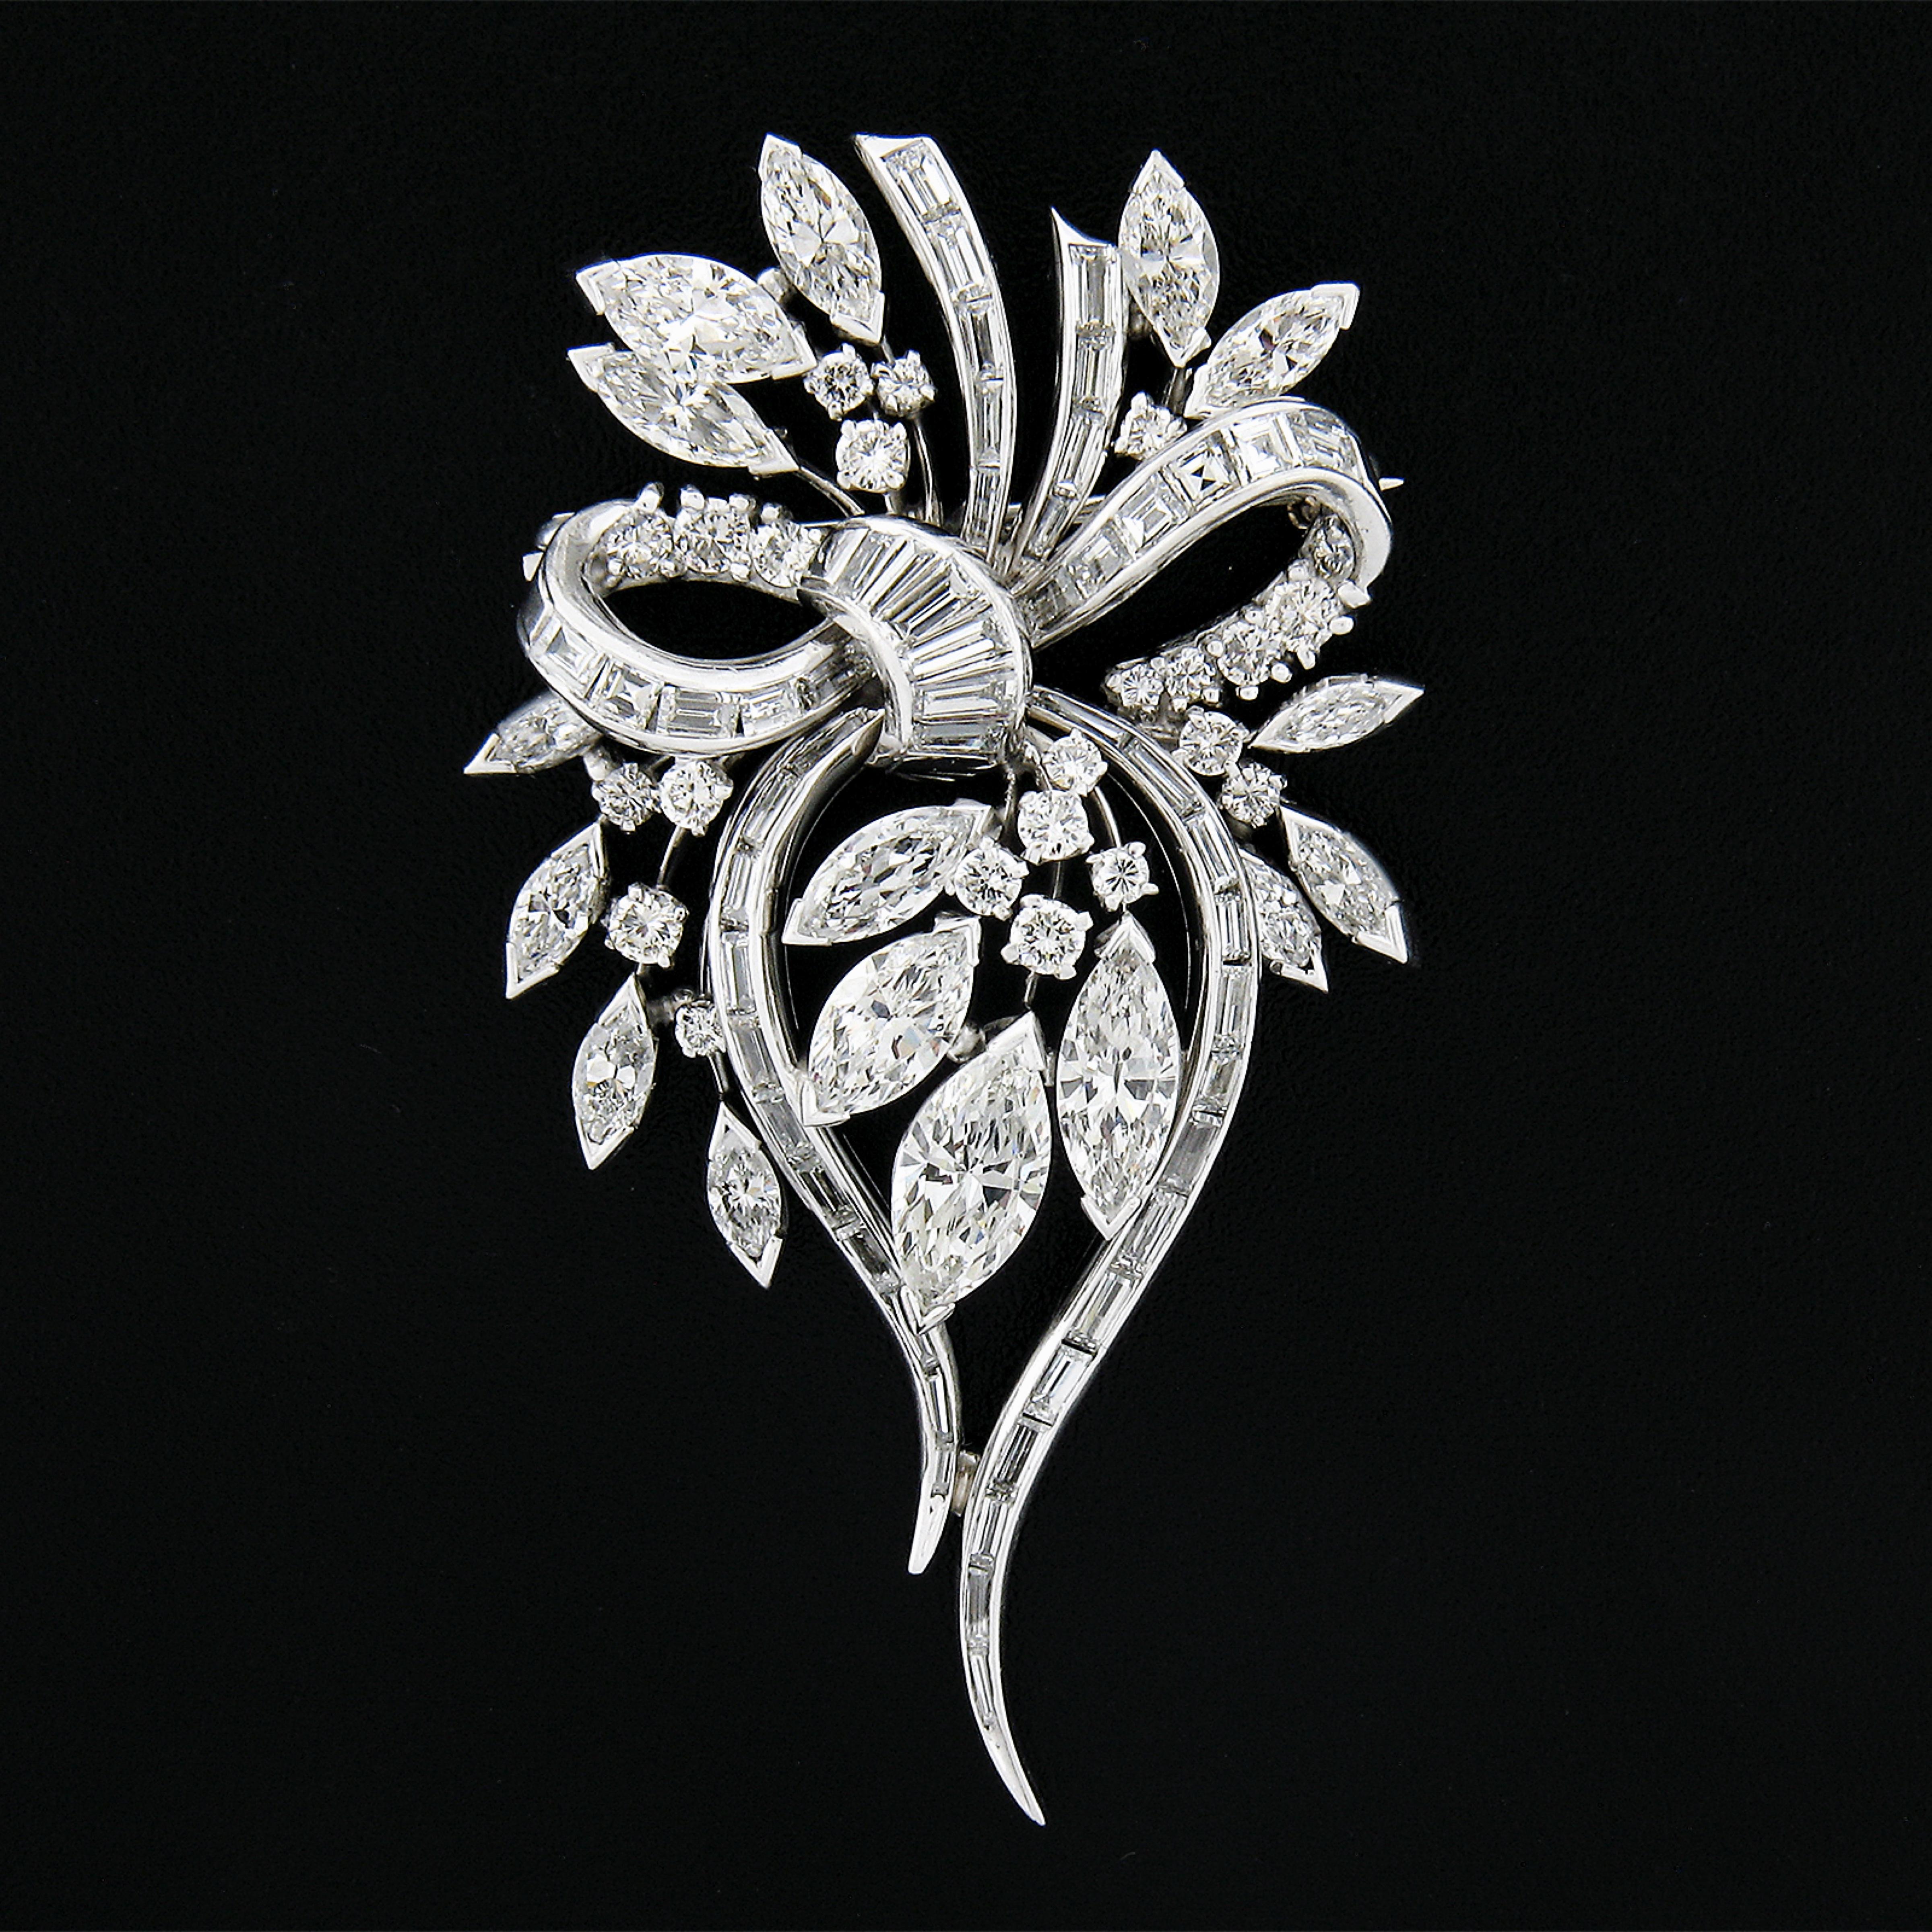 This truly magnificent and elegant mid-century diamond brooch is crafted in solid platinum and showcases a gorgeous floral design wrapped with an adorable knotted ribbon at its center. The flowers and leaves are done with old marquise and round